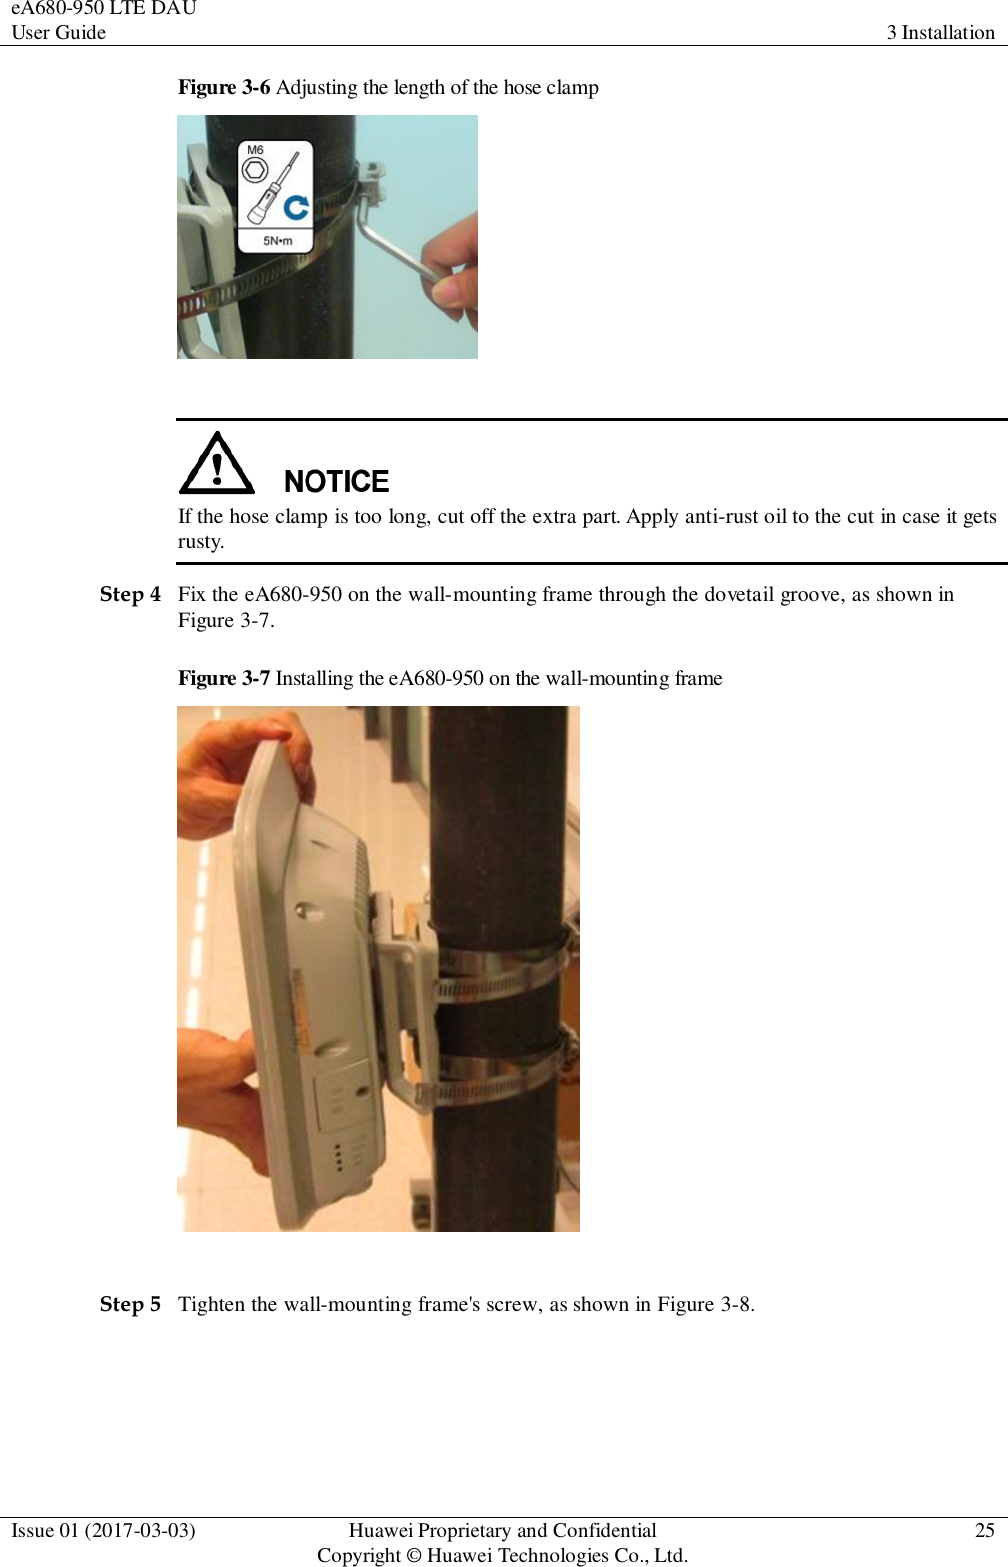 eA680-950 LTE DAU User Guide 3 Installation  Issue 01 (2017-03-03) Huawei Proprietary and Confidential                                     Copyright © Huawei Technologies Co., Ltd. 25  Figure 3-6 Adjusting the length of the hose clamp    If the hose clamp is too long, cut off the extra part. Apply anti-rust oil to the cut in case it gets rusty.   Step 4 Fix the eA680-950 on the wall-mounting frame through the dovetail groove, as shown in Figure 3-7. Figure 3-7 Installing the eA680-950 on the wall-mounting frame   Step 5 Tighten the wall-mounting frame&apos;s screw, as shown in Figure 3-8.   